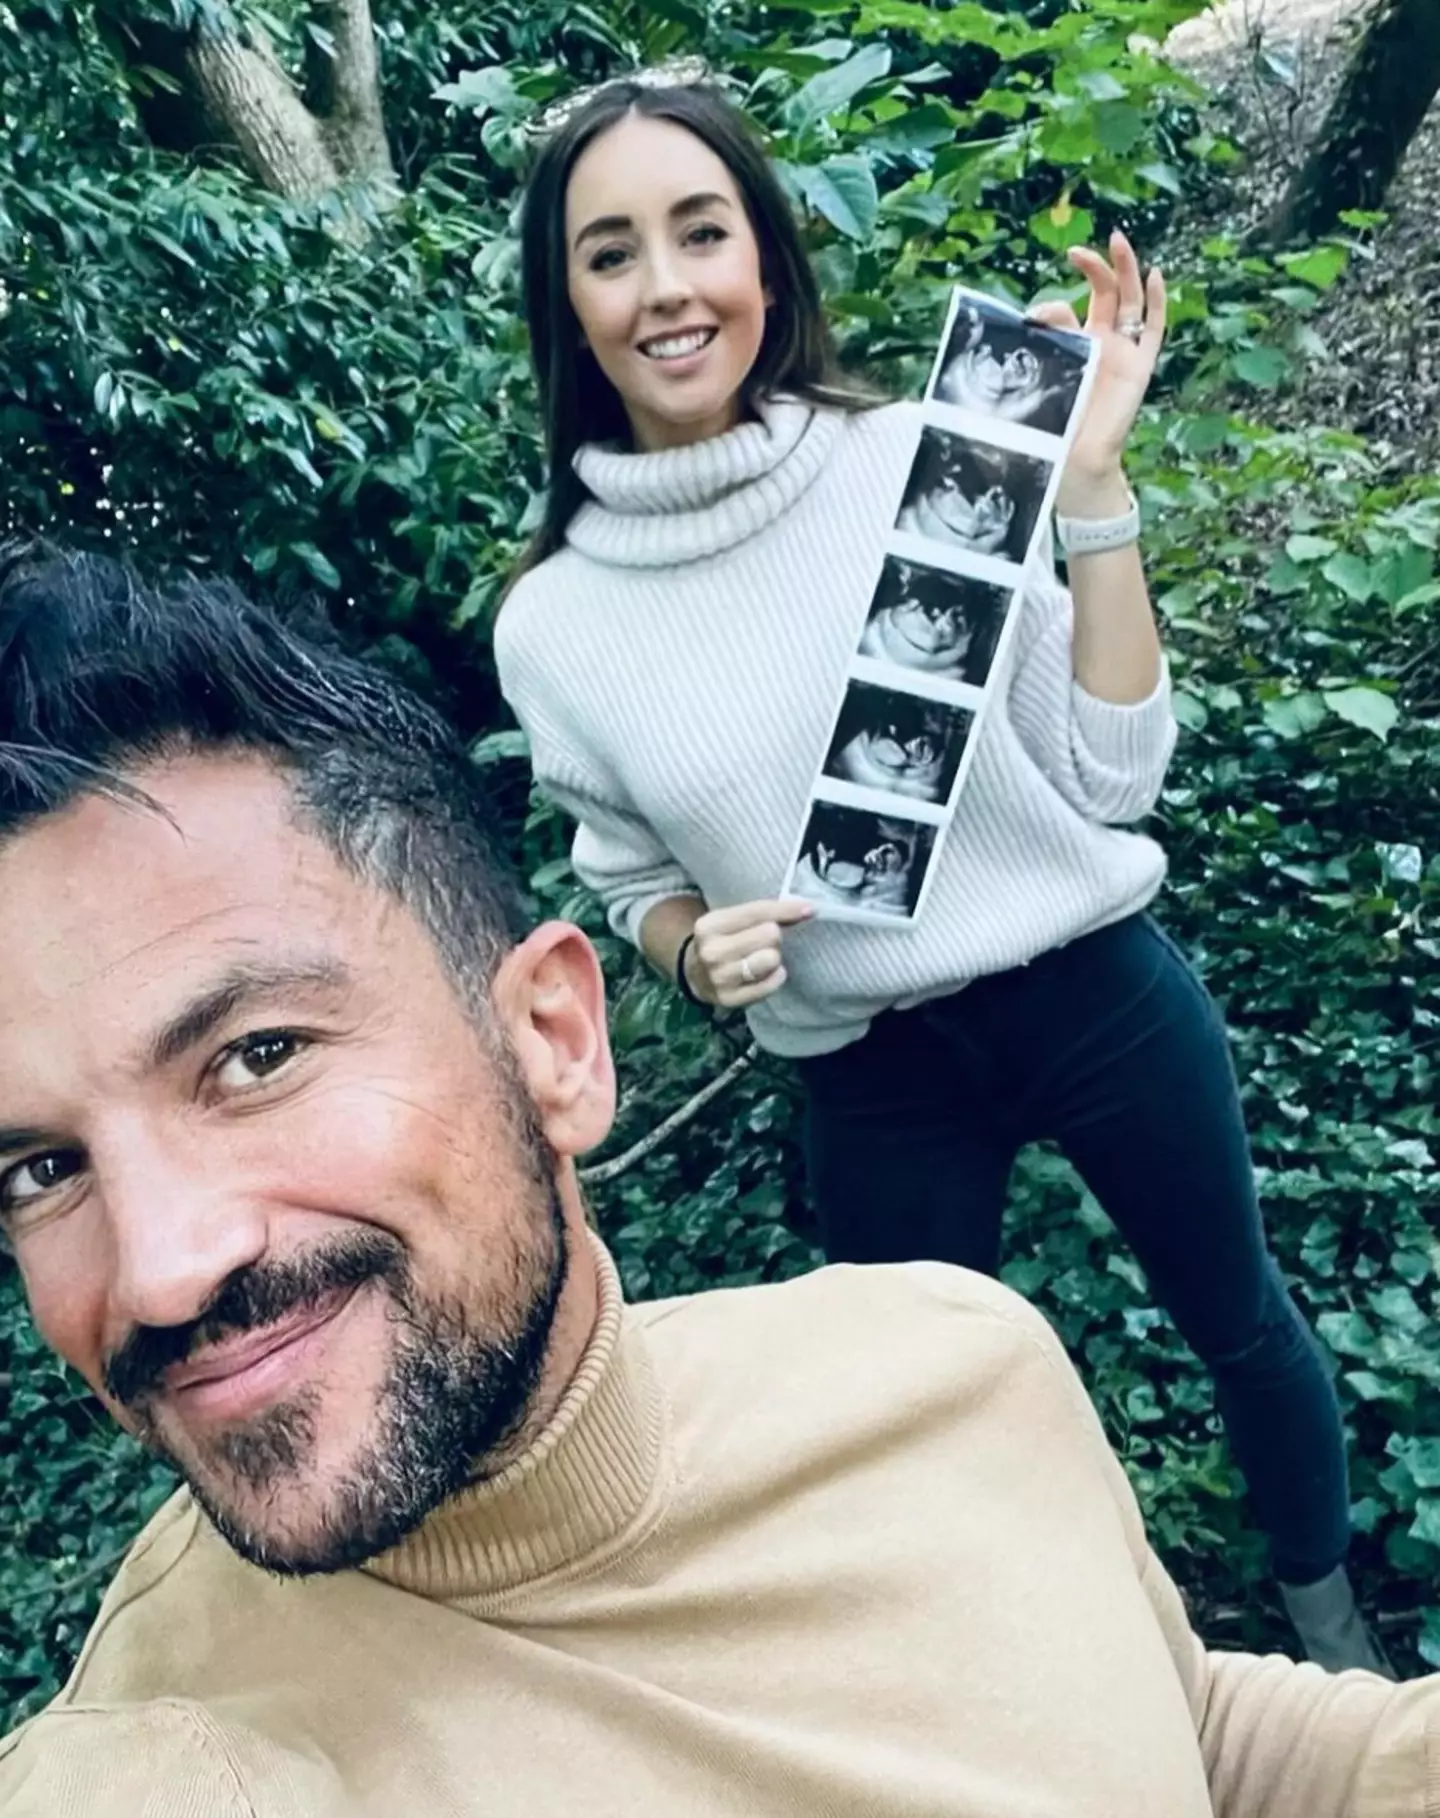 Emily and Peter announced their news in October.